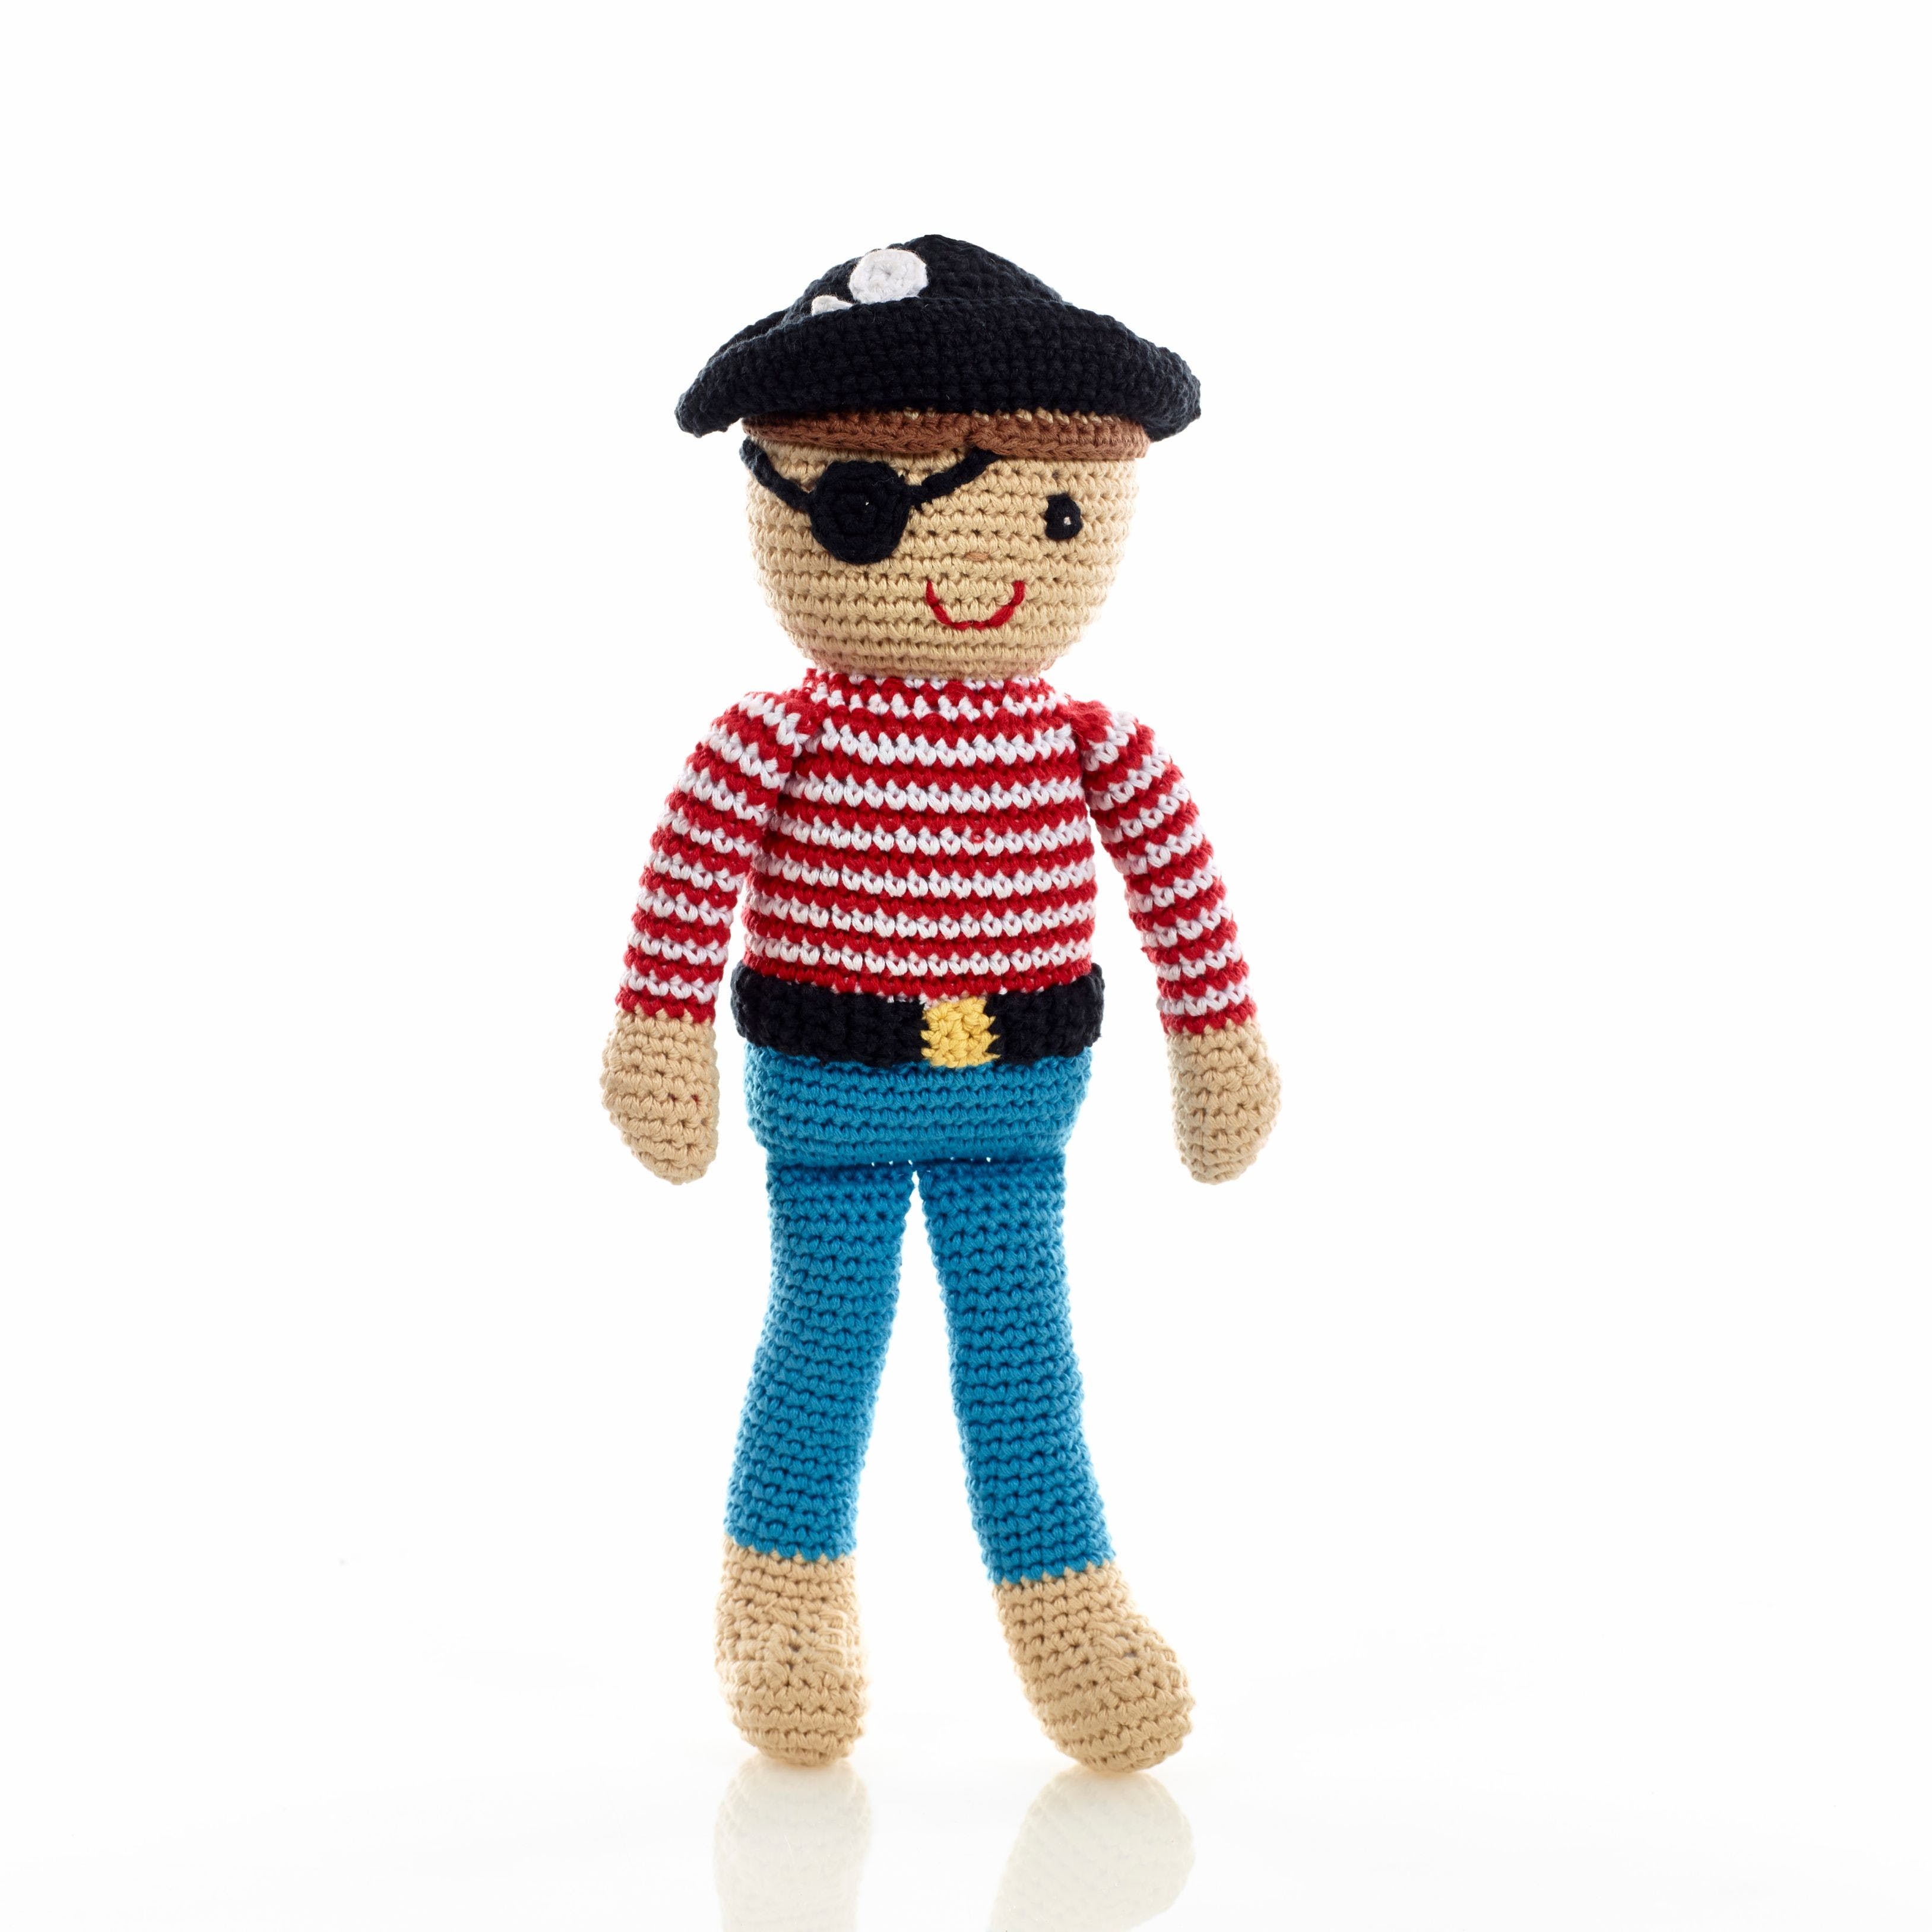 Pebblechild Once Upon a Time Pirate Knitted Soft Toy